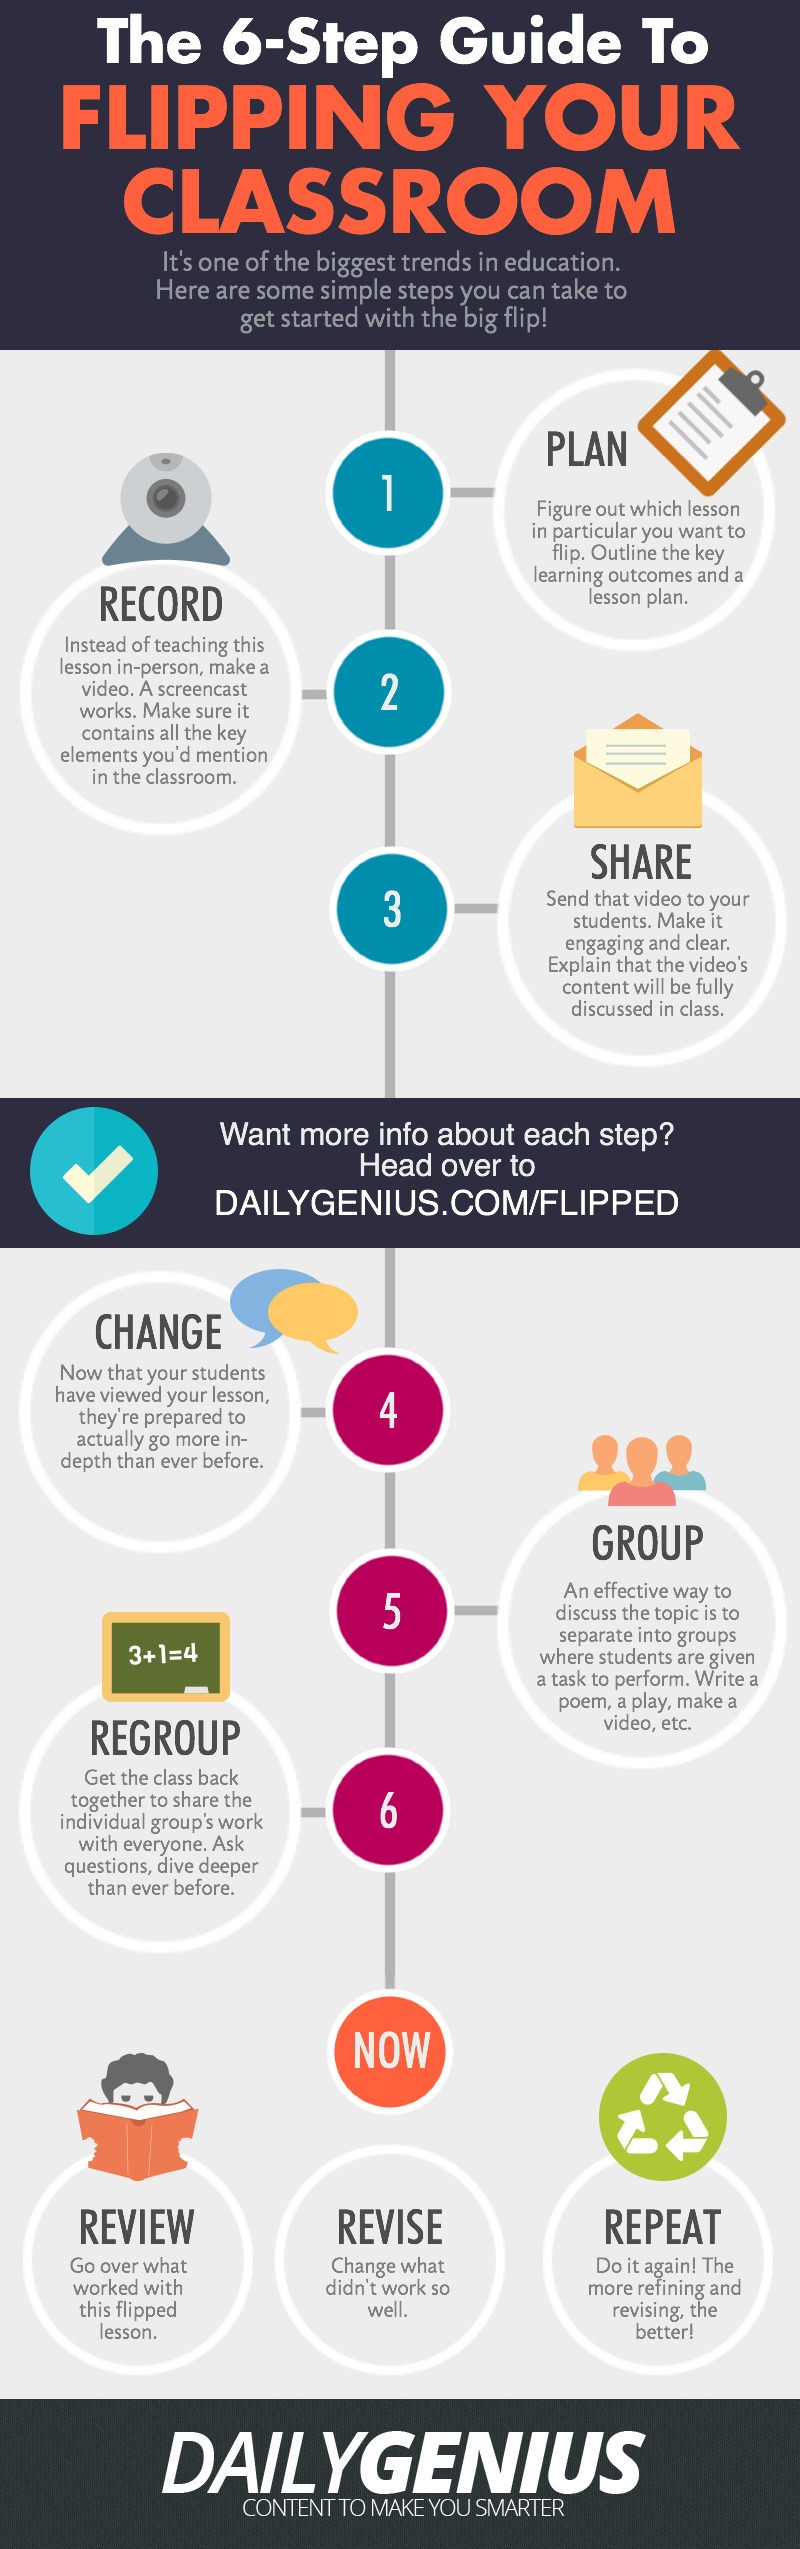 6 Steps to Flipping A Classroom Infographic